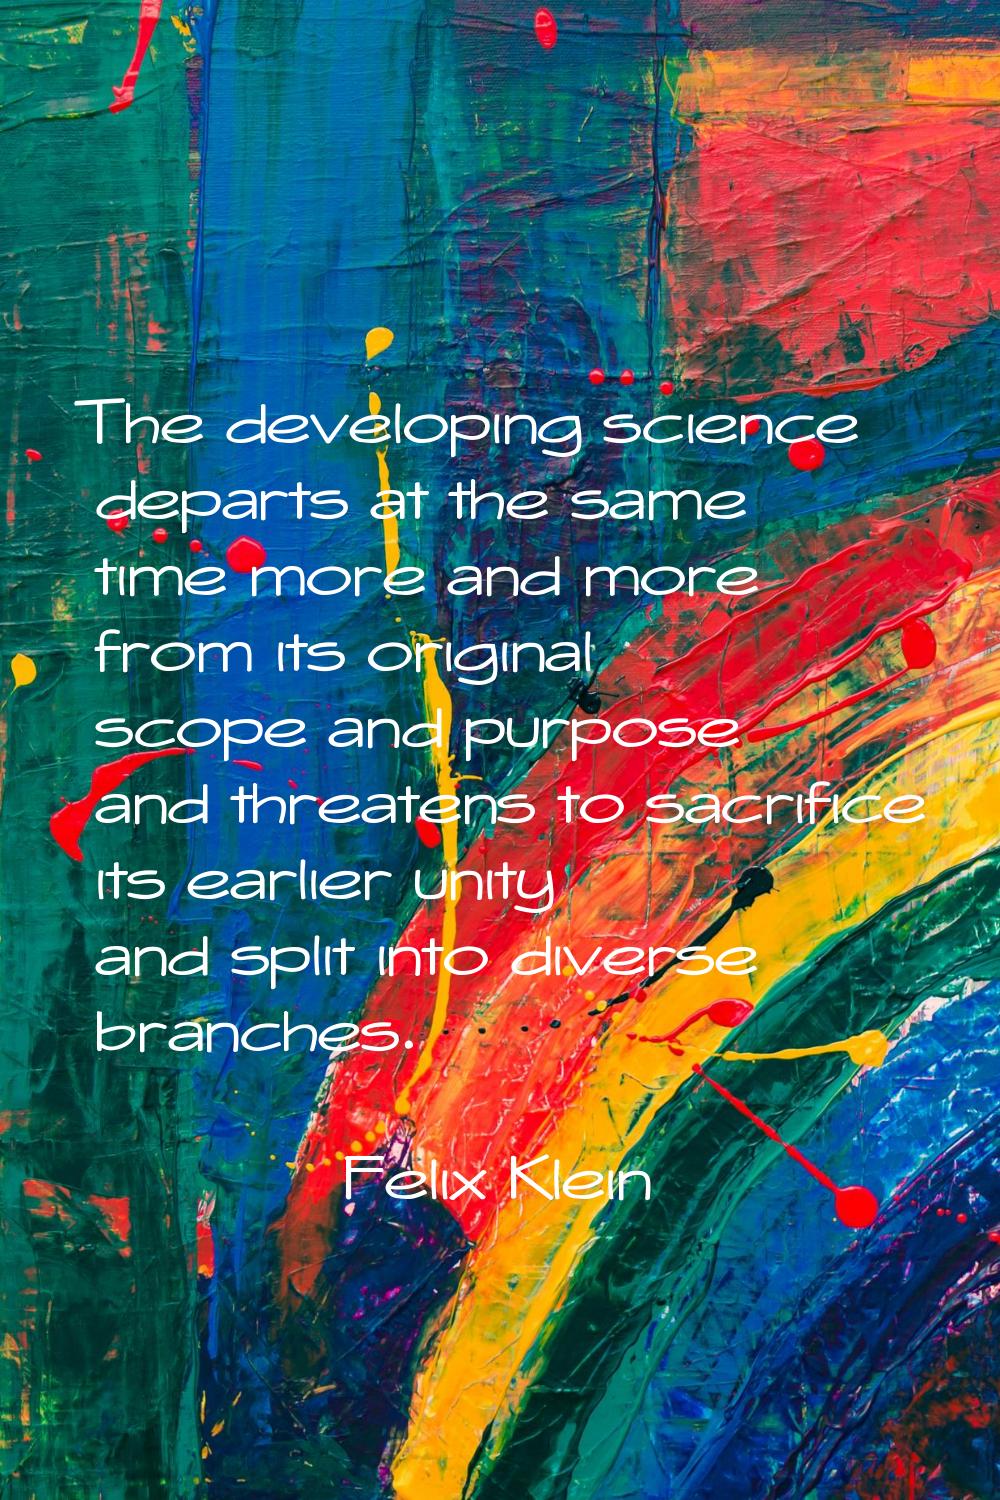 The developing science departs at the same time more and more from its original scope and purpose a